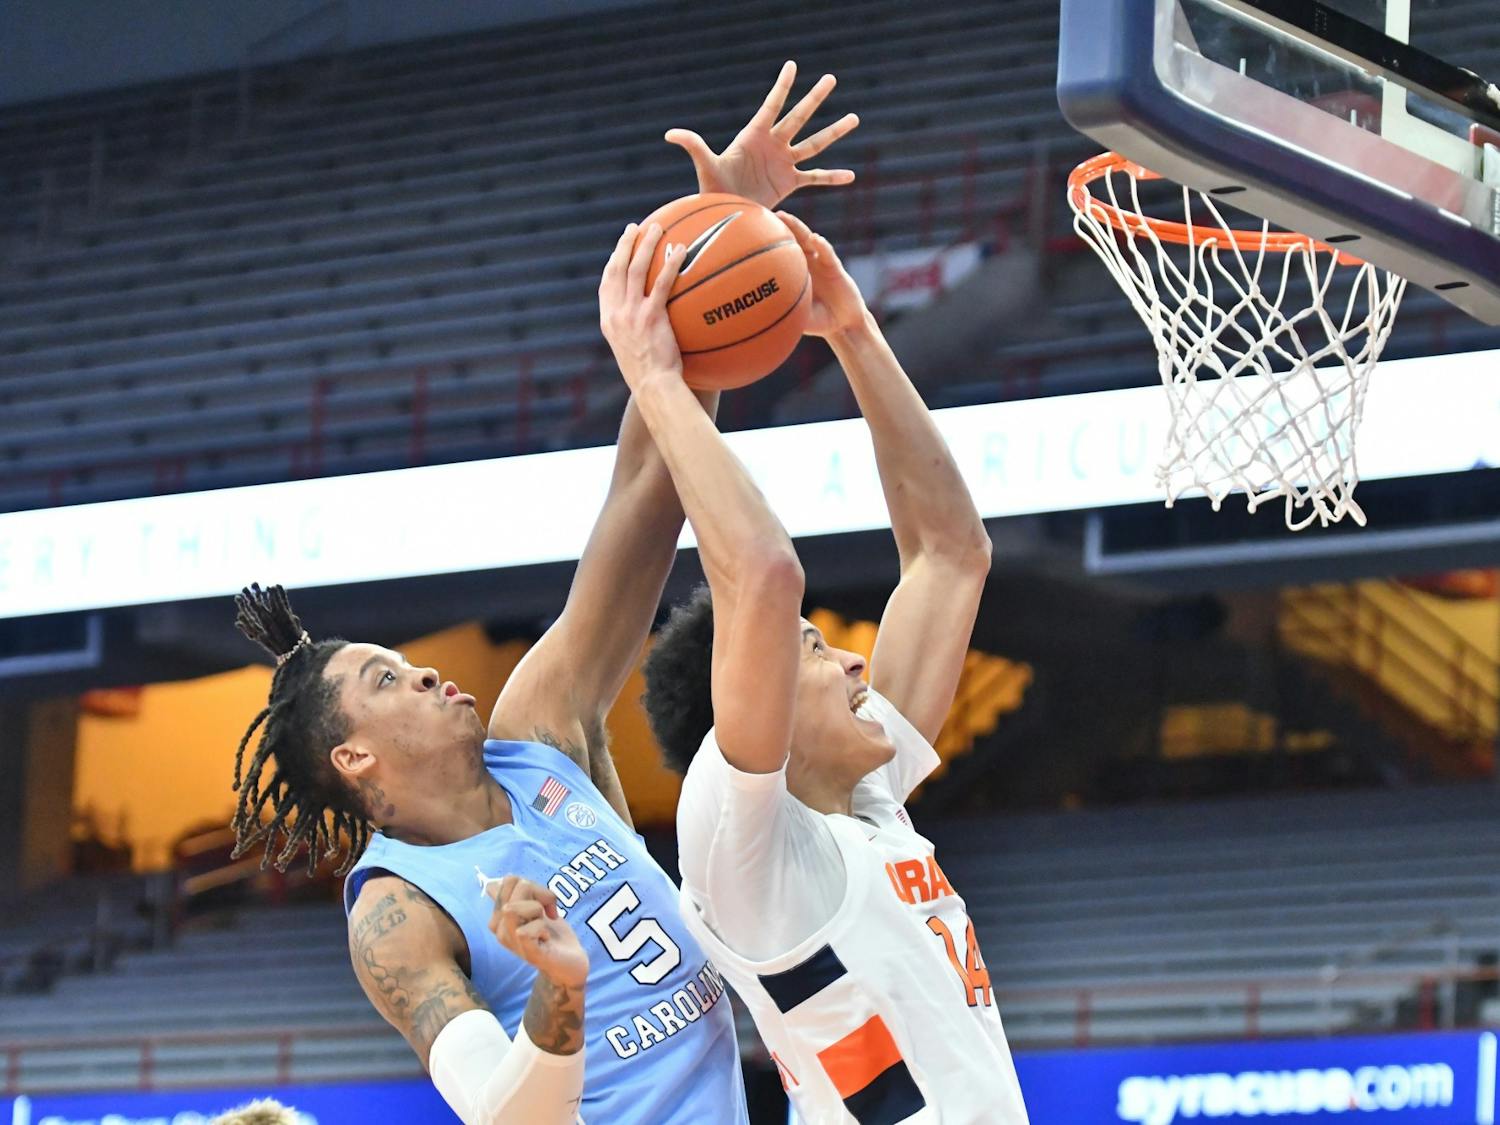 Mar 1, 2021; Syracuse, New York, USA; Syracuse Orange center Jesse Edwards (14) struggles to take a shot as North Carolina Tar Heels forward Armando Bacot (5) applies pressure in the first half at the Carrier Dome. Photo courtesy of Mark Konezny/USA TODAY Sports